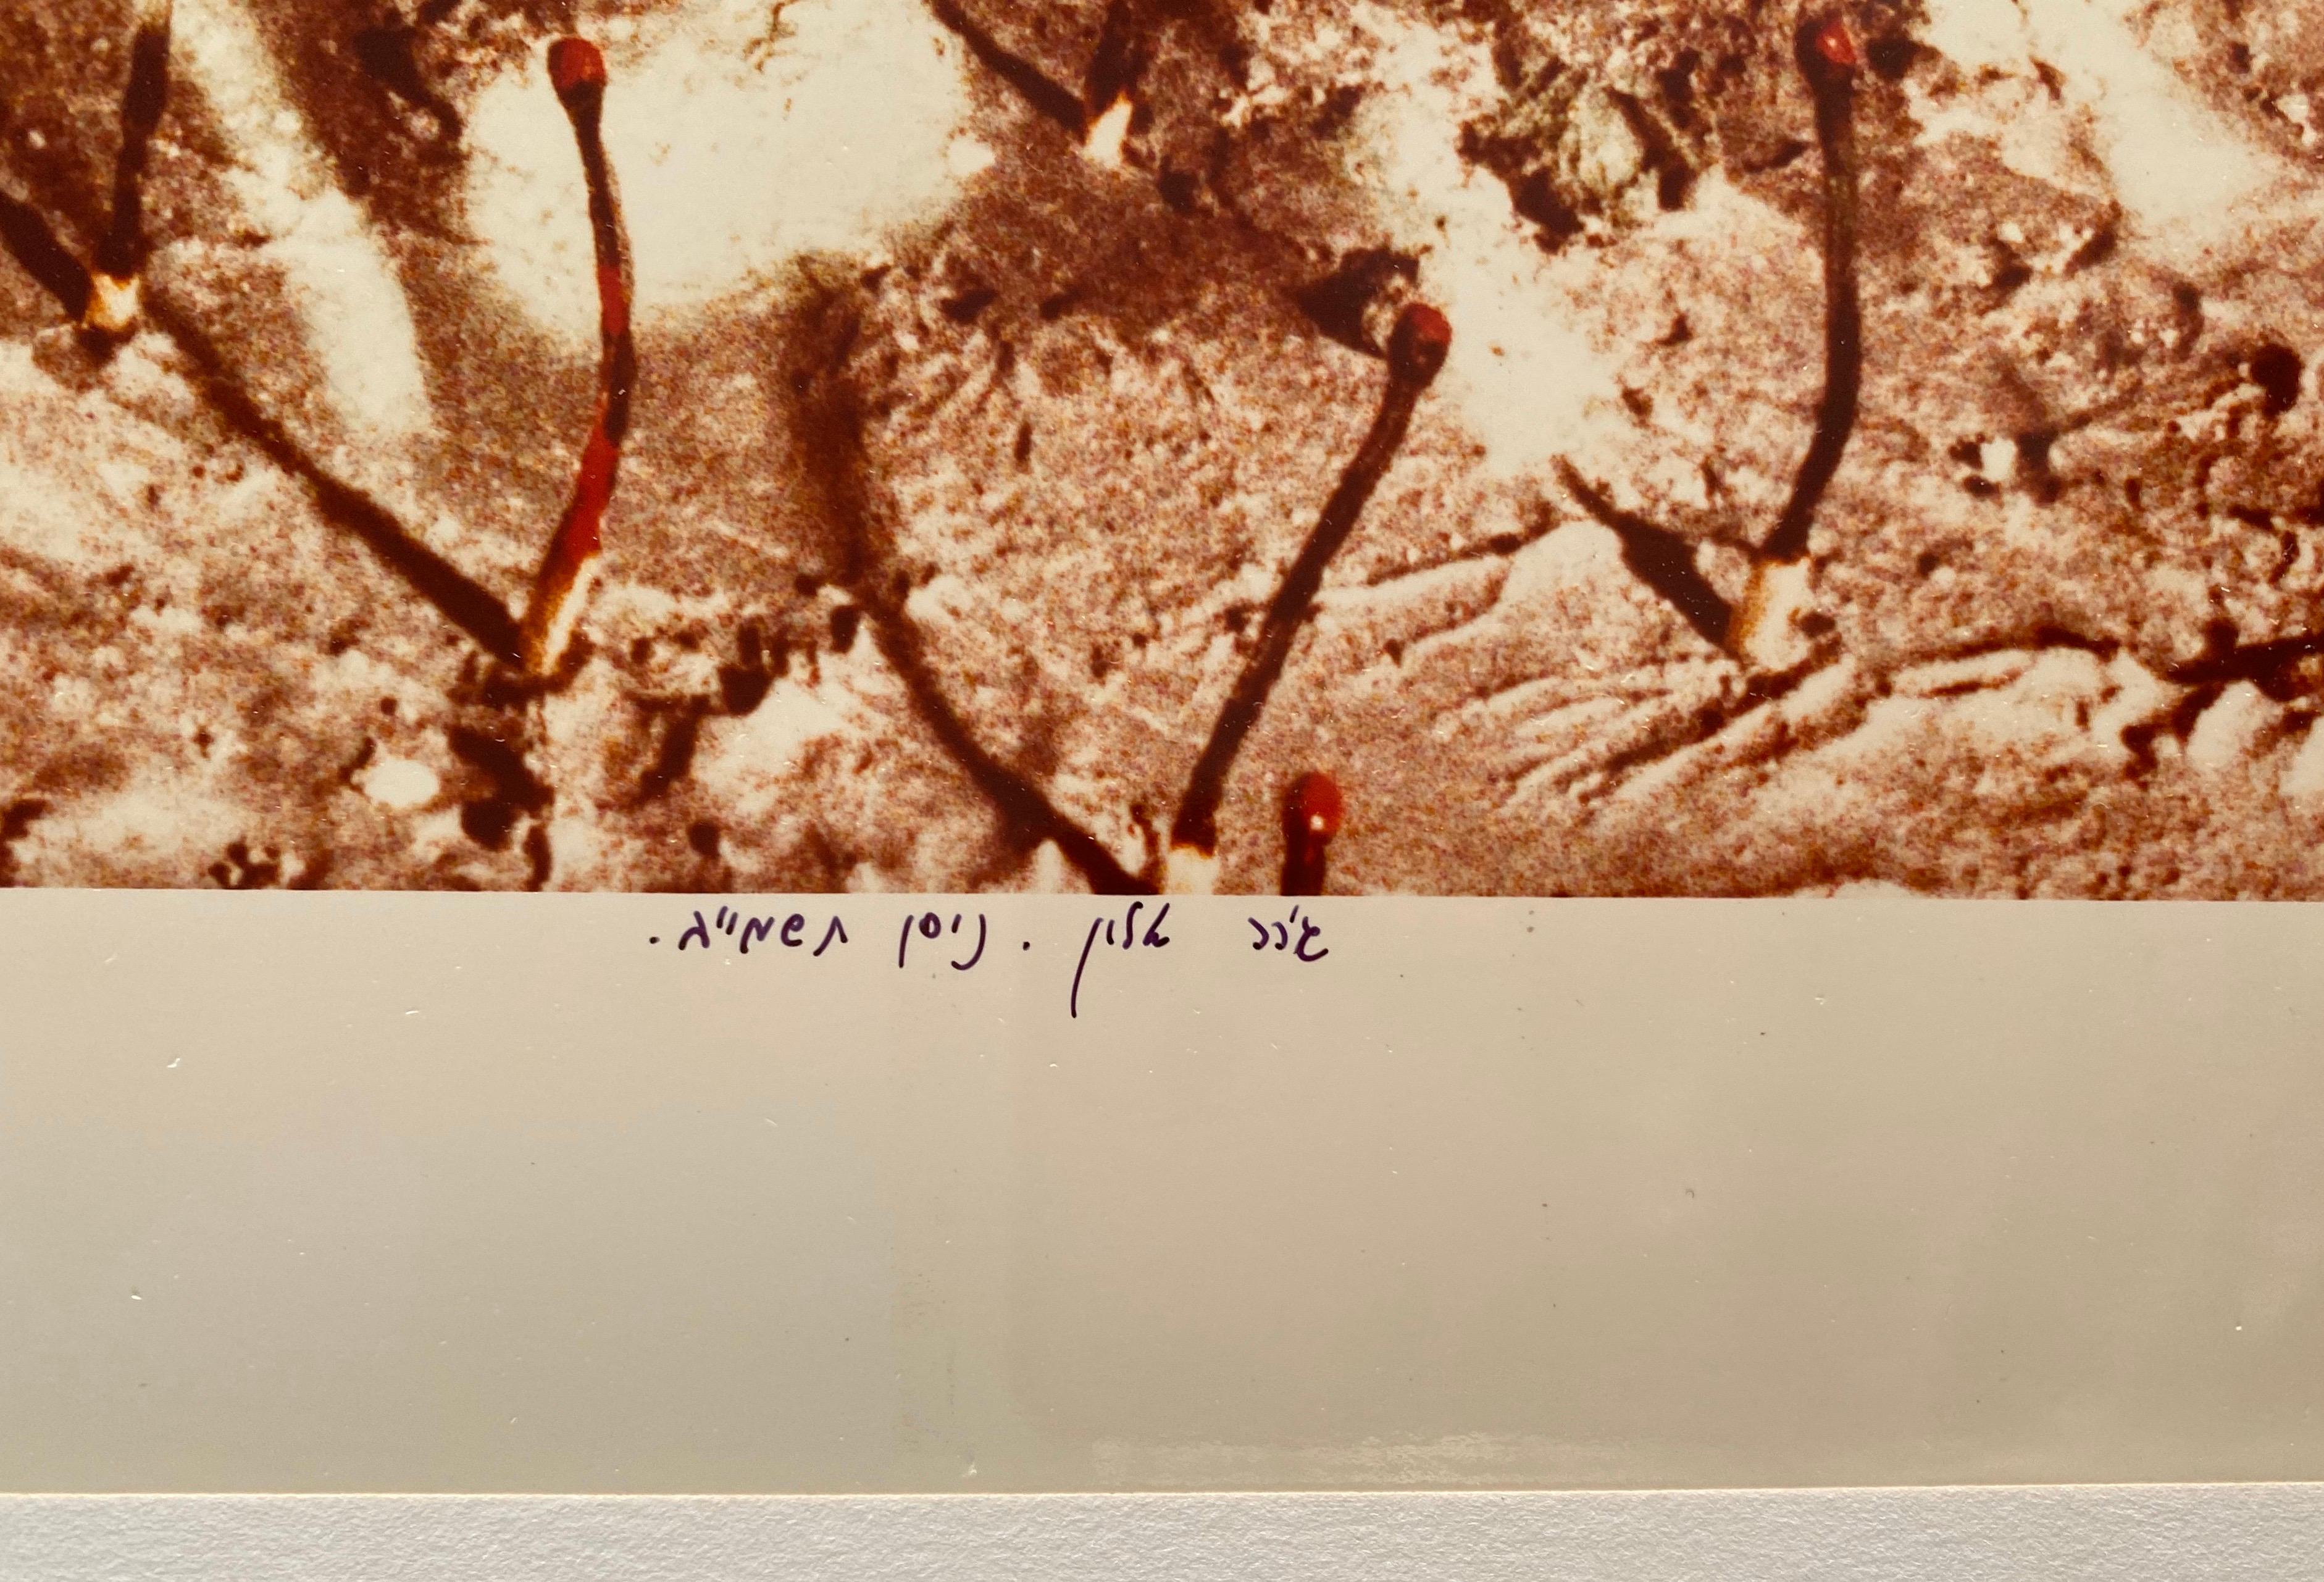 SLAVES WE WERE, 1982, color photograph, signed and dated and titled in ink, numbered 3/50, sheet 12 x 16”. Hand signed, titled and has the edition number on the recto.
Gerard Allon, photographer, born 1949, Casablanca, Morocco. Immigrated to Israel